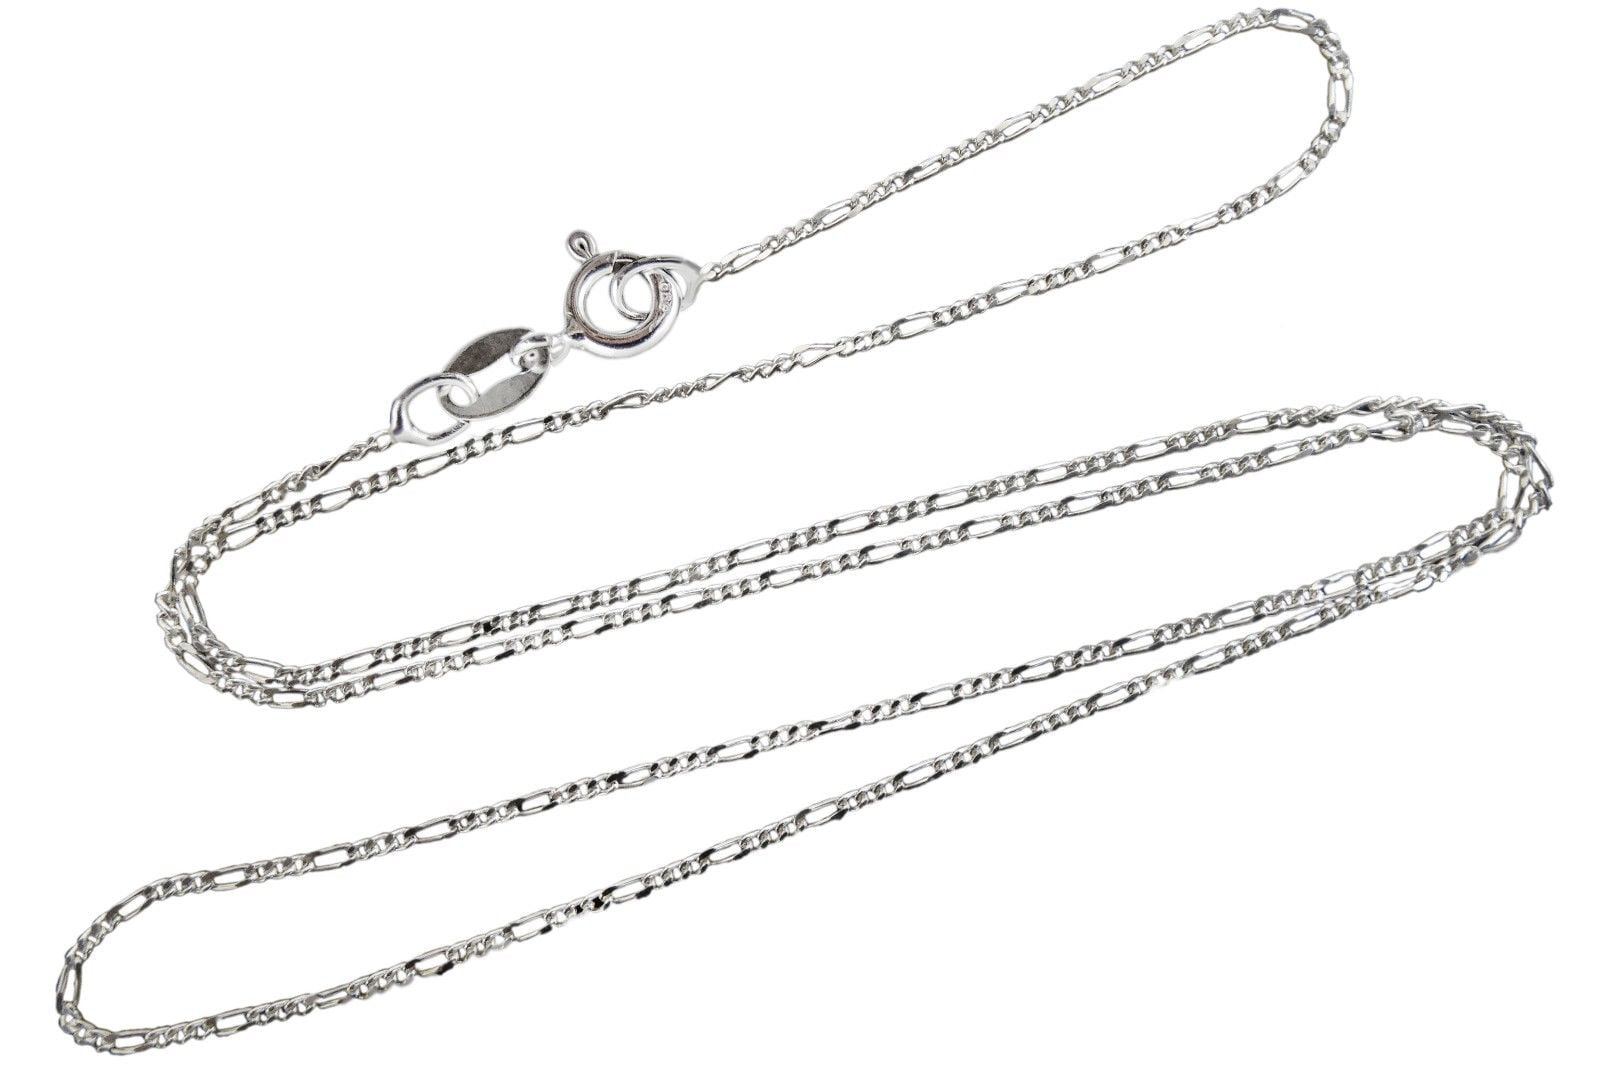 Pure 7mm 925 Sterling Silver Necklaces Solid Curb Link Chain made in italy 